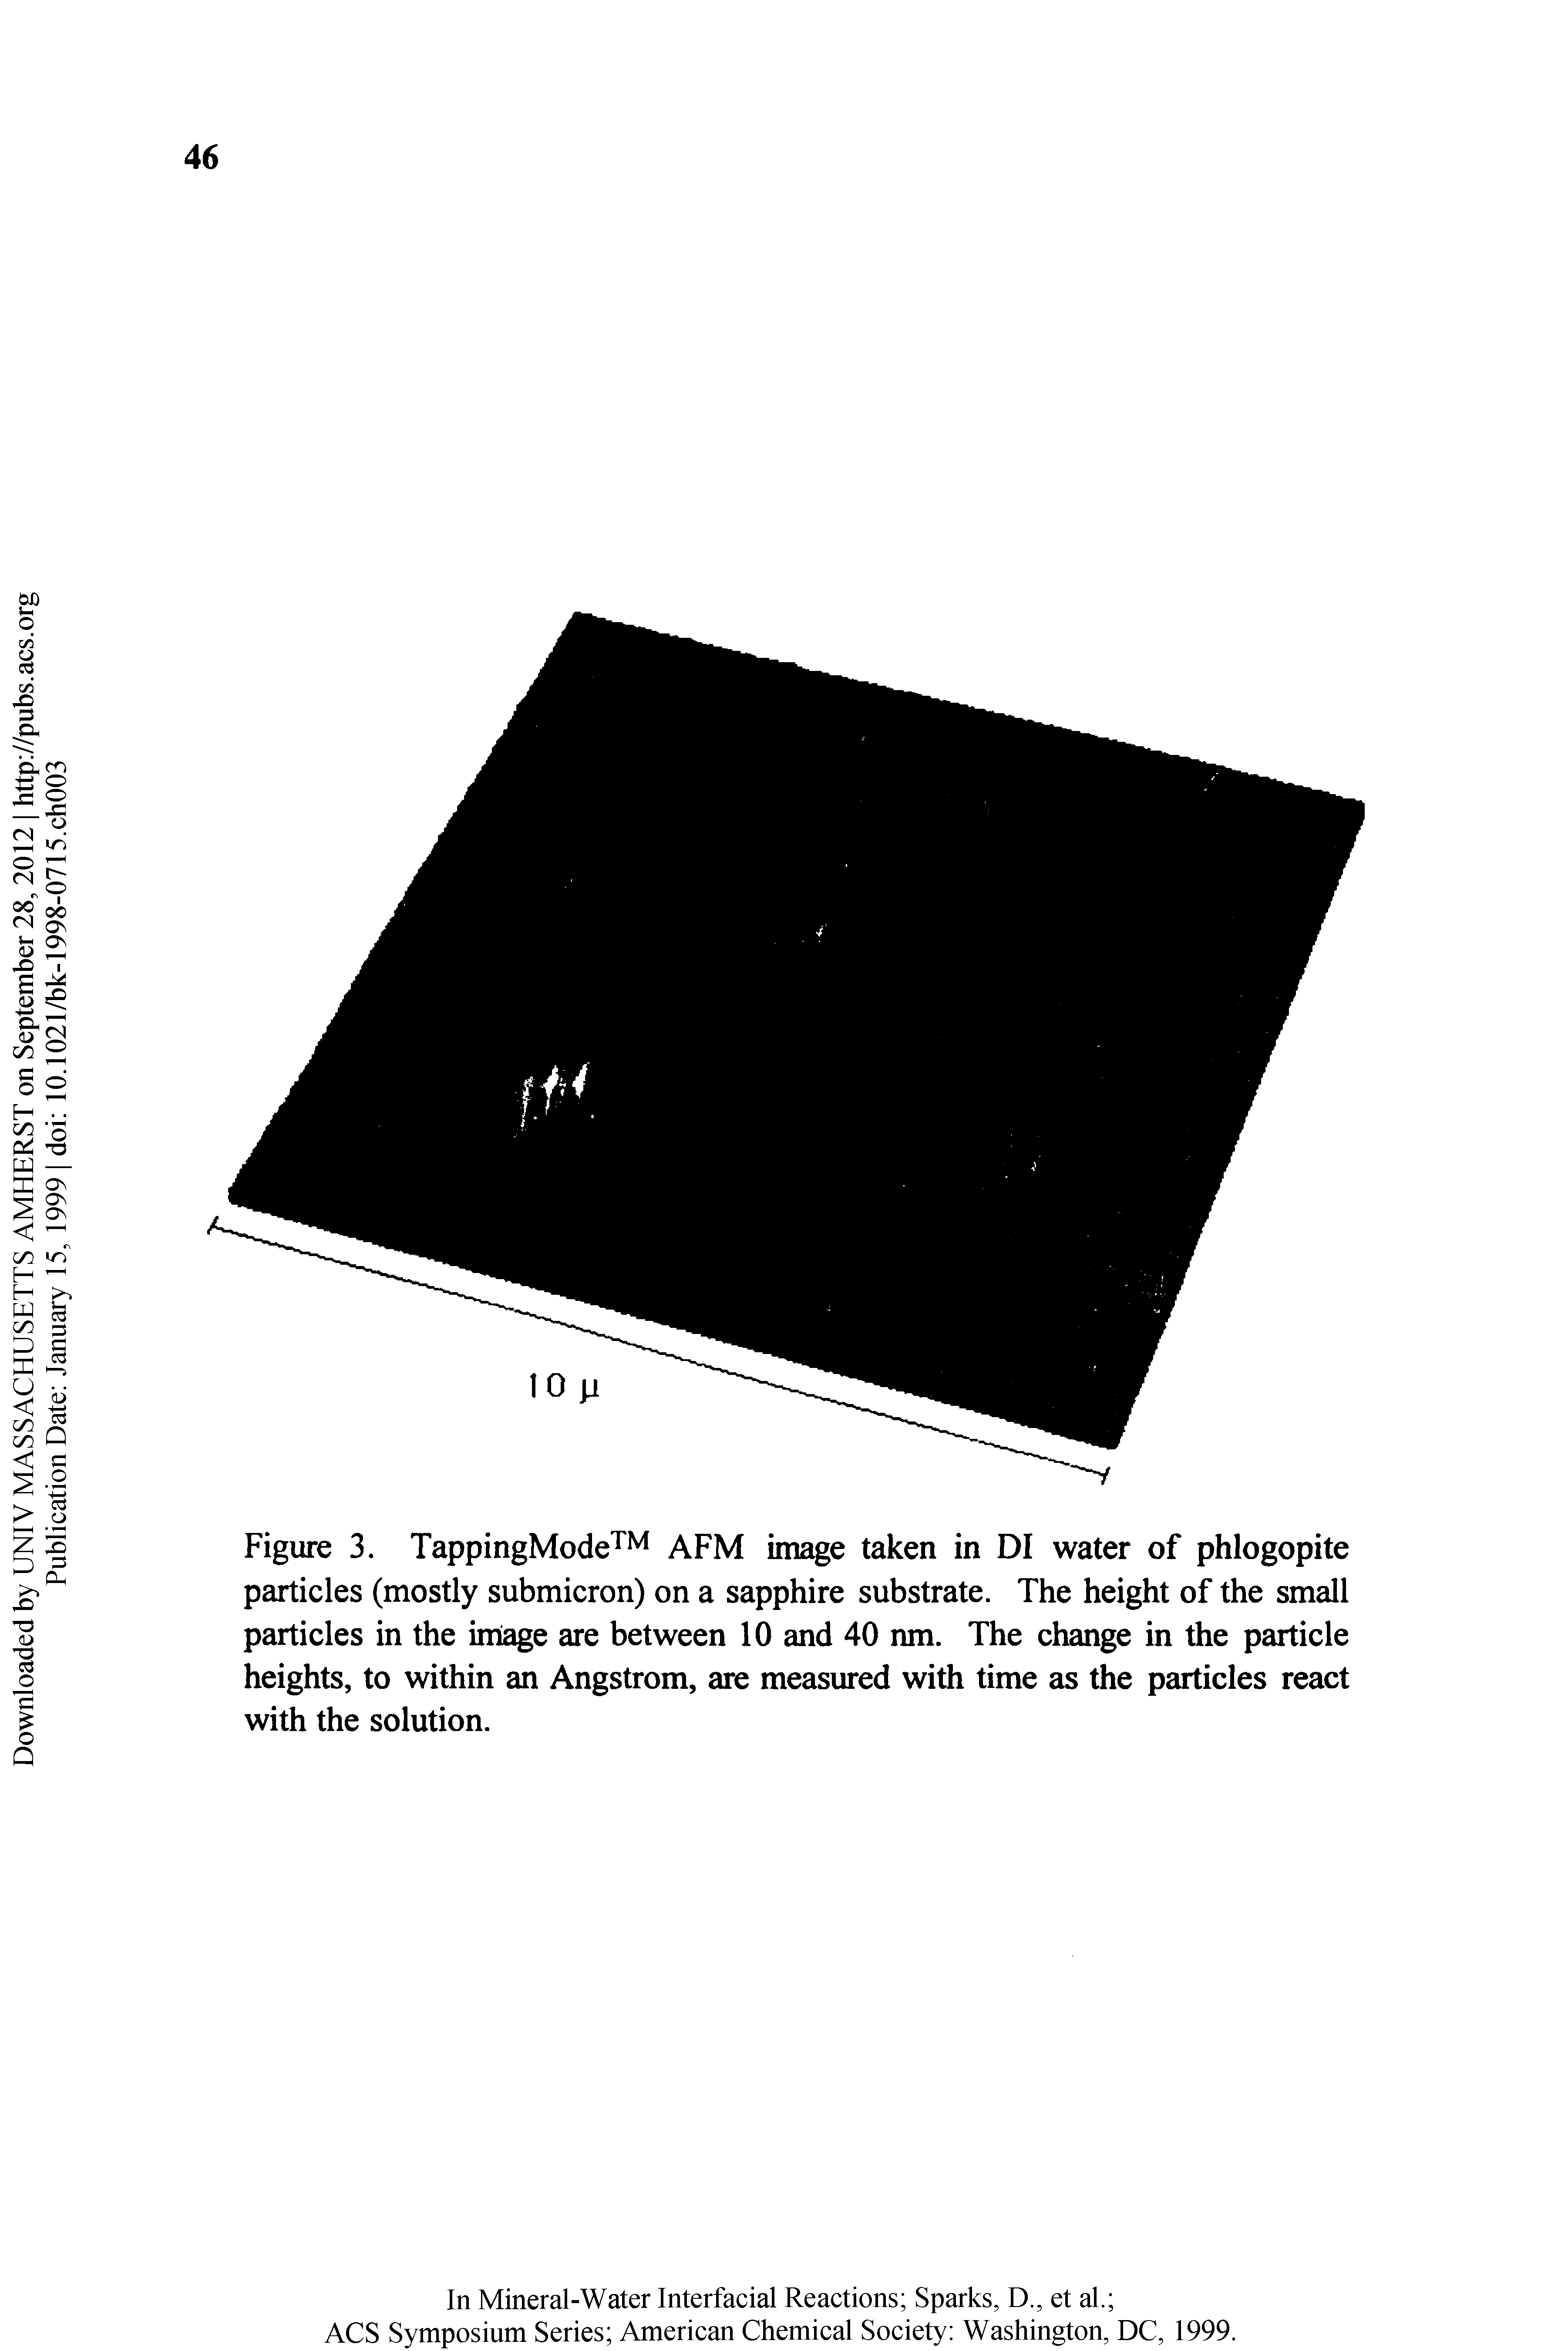 Figure 3. TappingMode AFM image taken in DI water of phlogopite particles (mostly submicron) on a sapphire substrate. The height of the small particles in the image are between 10 and 40 nm. The change in the particle heights, to within an Angstrom, are measured with time as the particles react with the solution.